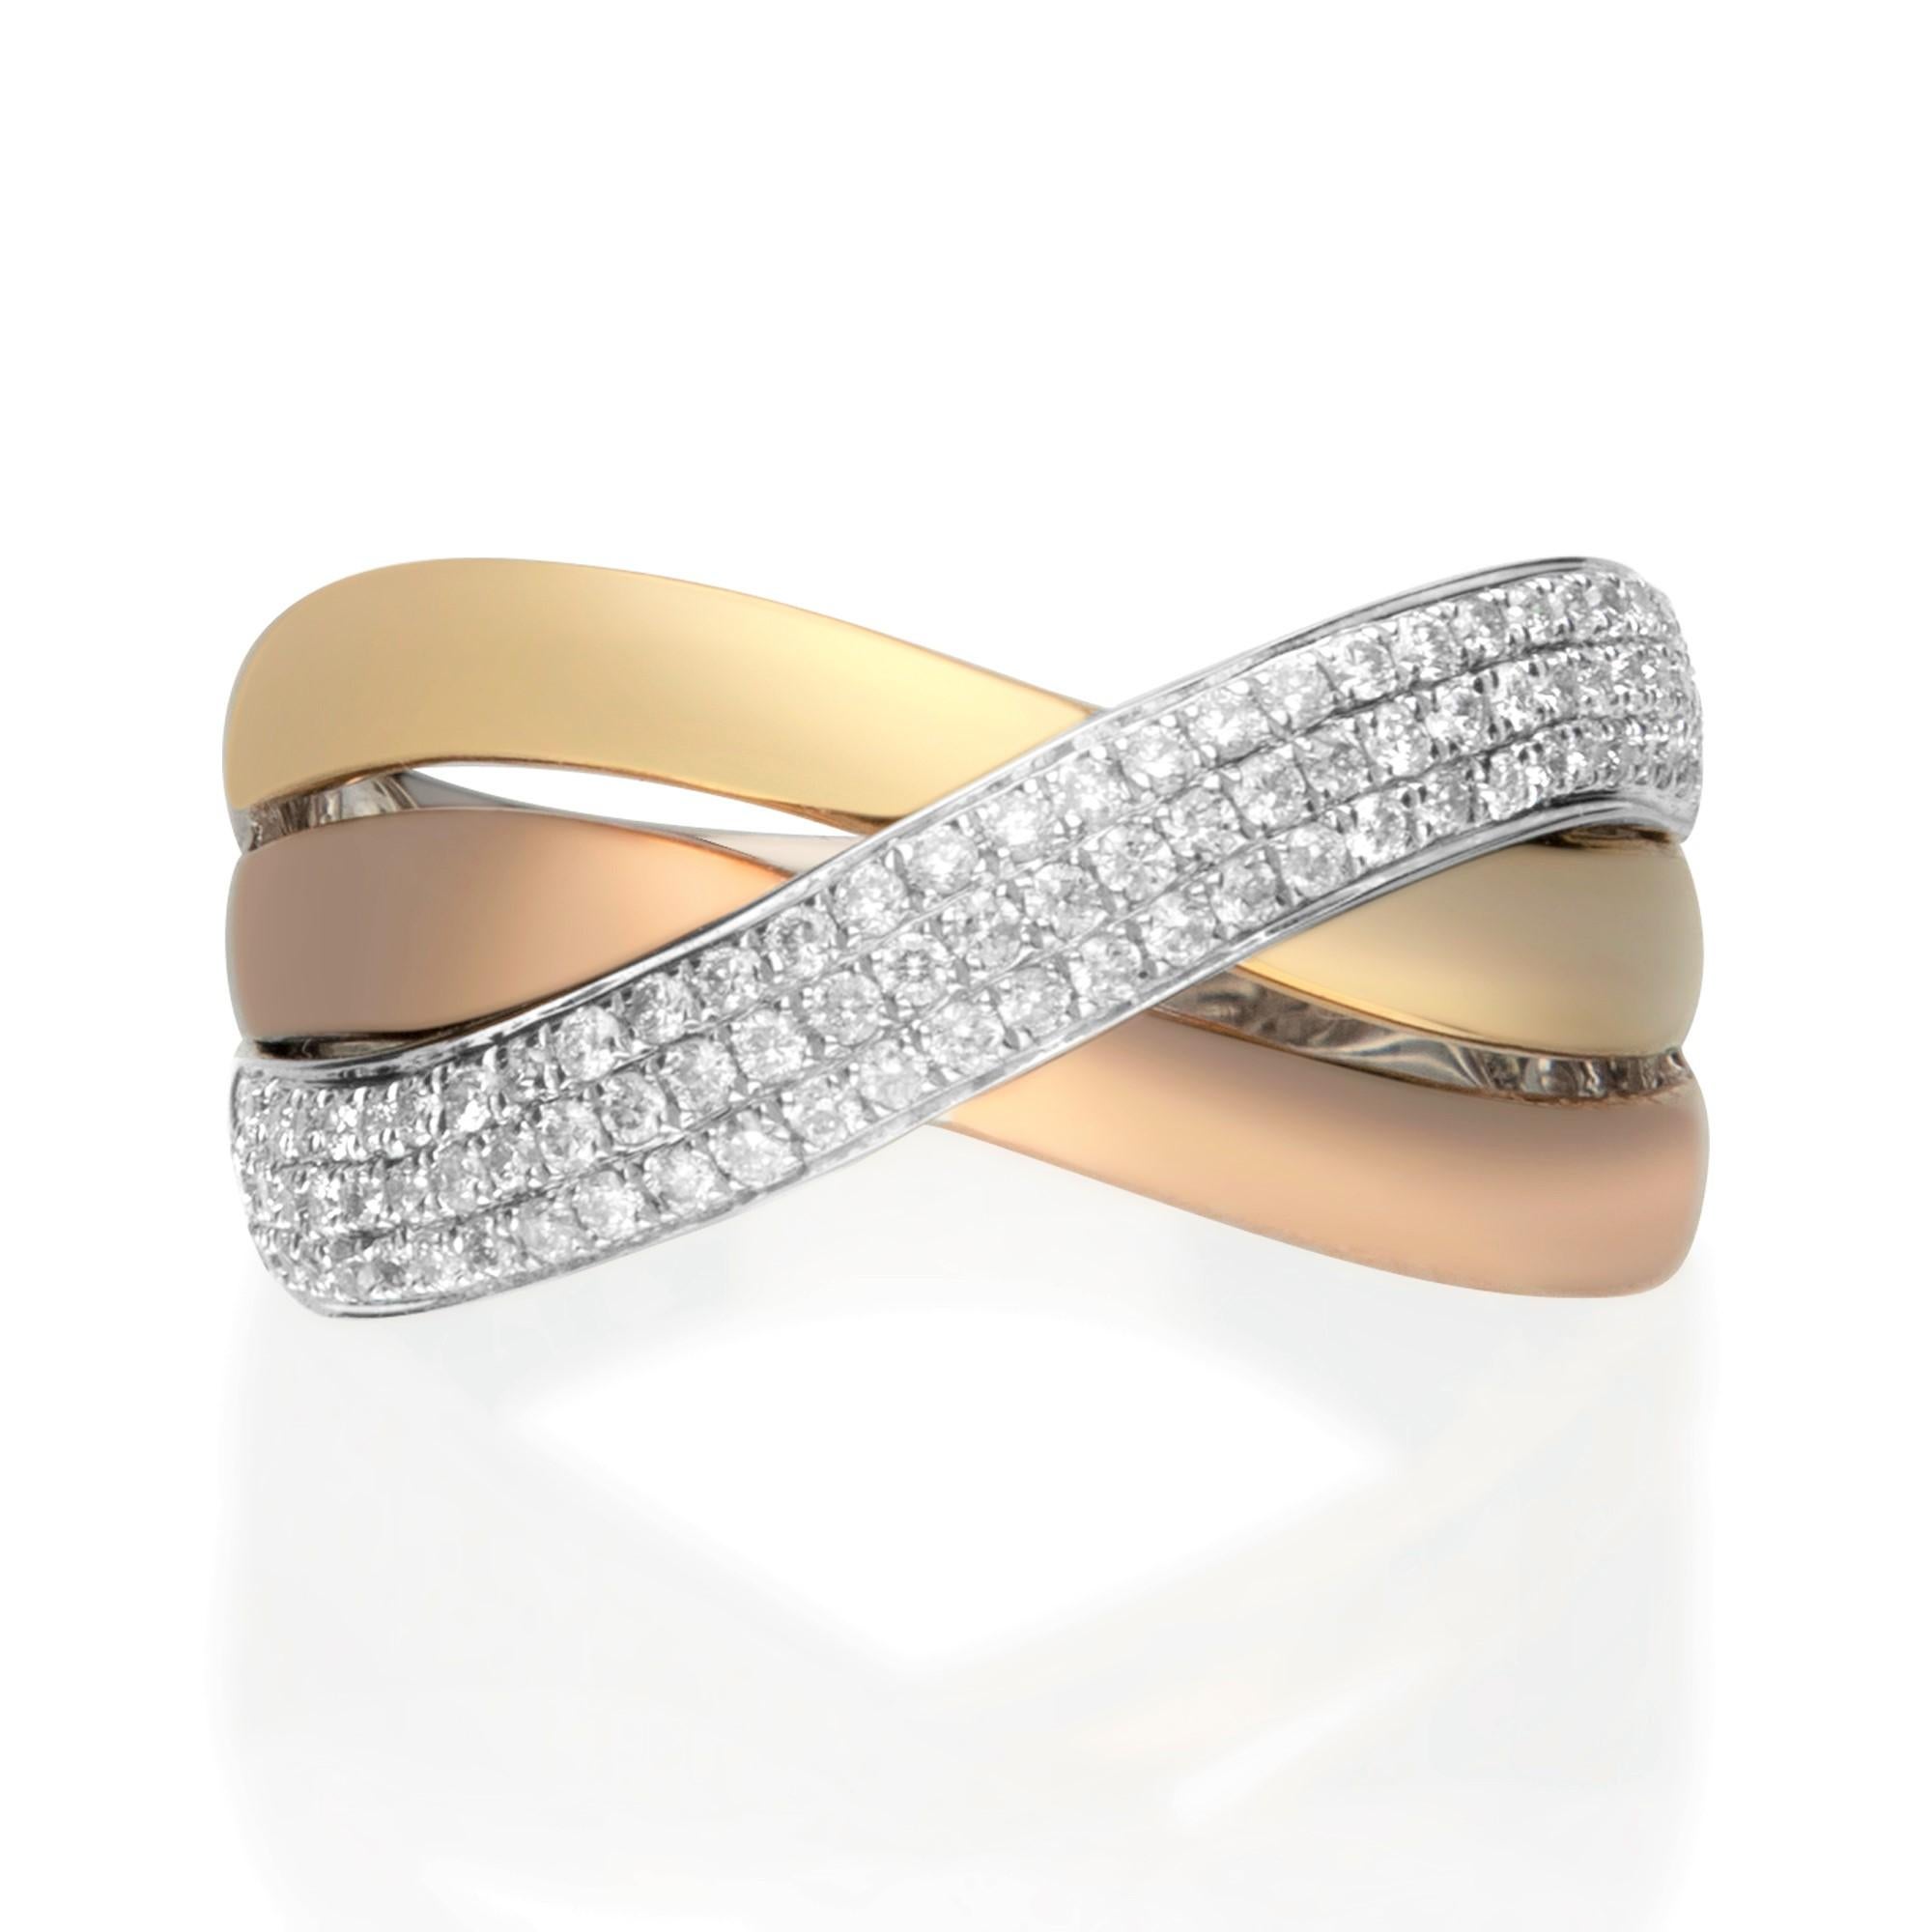 Fashioned in 14K three Tone gold by Gin and Grace, this jewelry is the ideal way to showcase your bold style. 
This ring features 88 glistening Round diamonds 0.38 carat in GH-SI quality with a lovely curve design. 

Diamonds: 0.38 Carat
Quality: GH